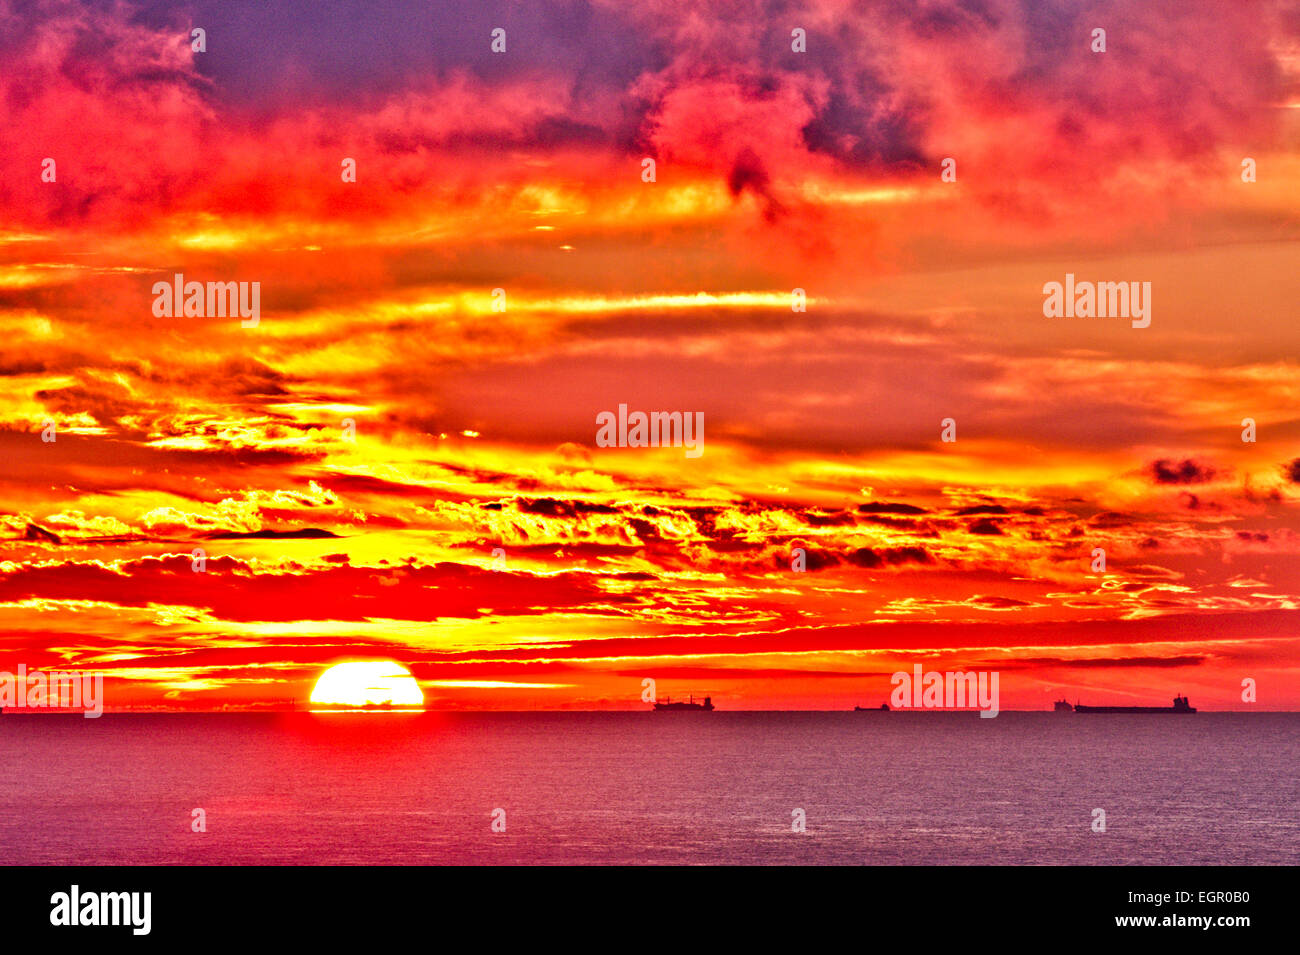 The English Channel seen from dover with the sunrise in a spectacular red and yellow sky over Calais and the French coast. Tankers sailing on horizon. Stock Photo